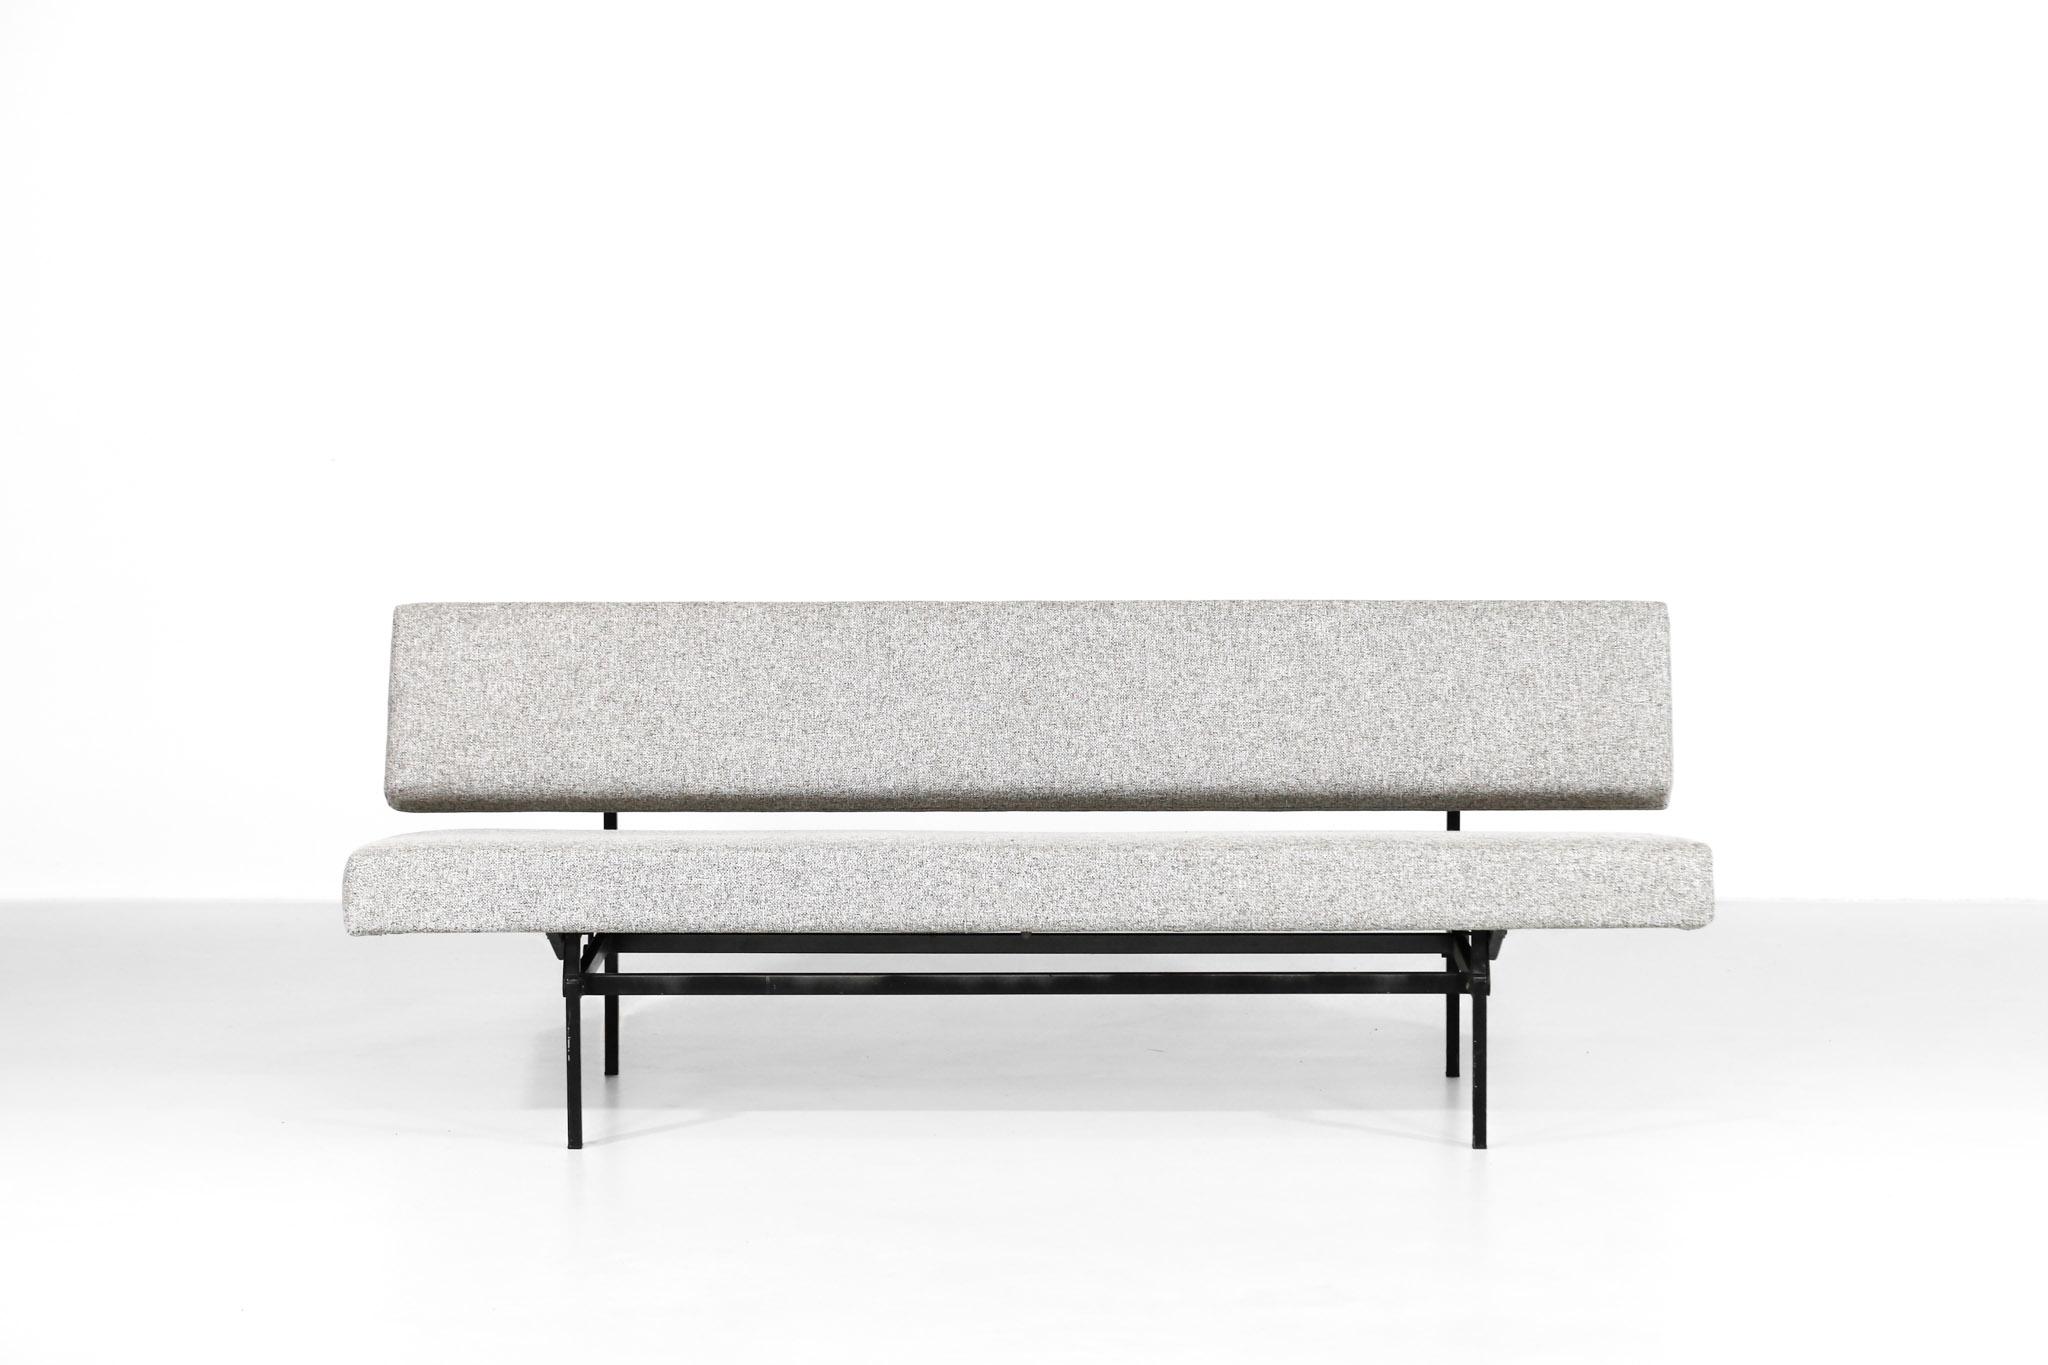 Nice sofa designed by Martin Visser for 't Spectrum.
Freshly re-upholstered with new fabric and foam. Structure in metal. 
2 positions, can be converting in bed.
 